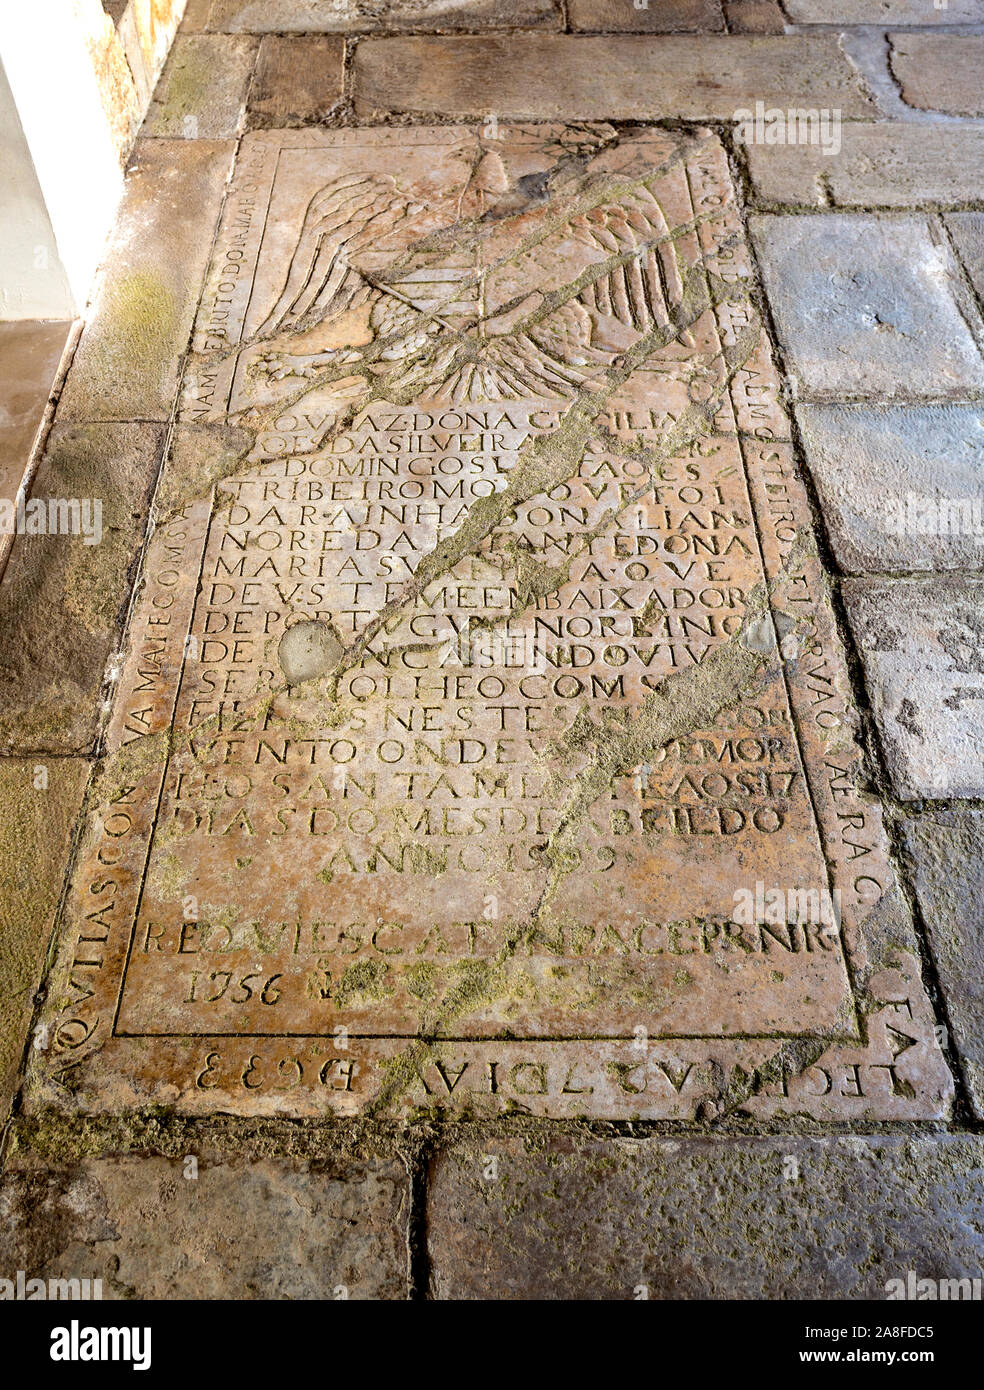 Different types of tombstones according to the religious and social status of the nuns in the cloister of the Monastery of Saint Mary of Lorvao, Coimb Stock Photo